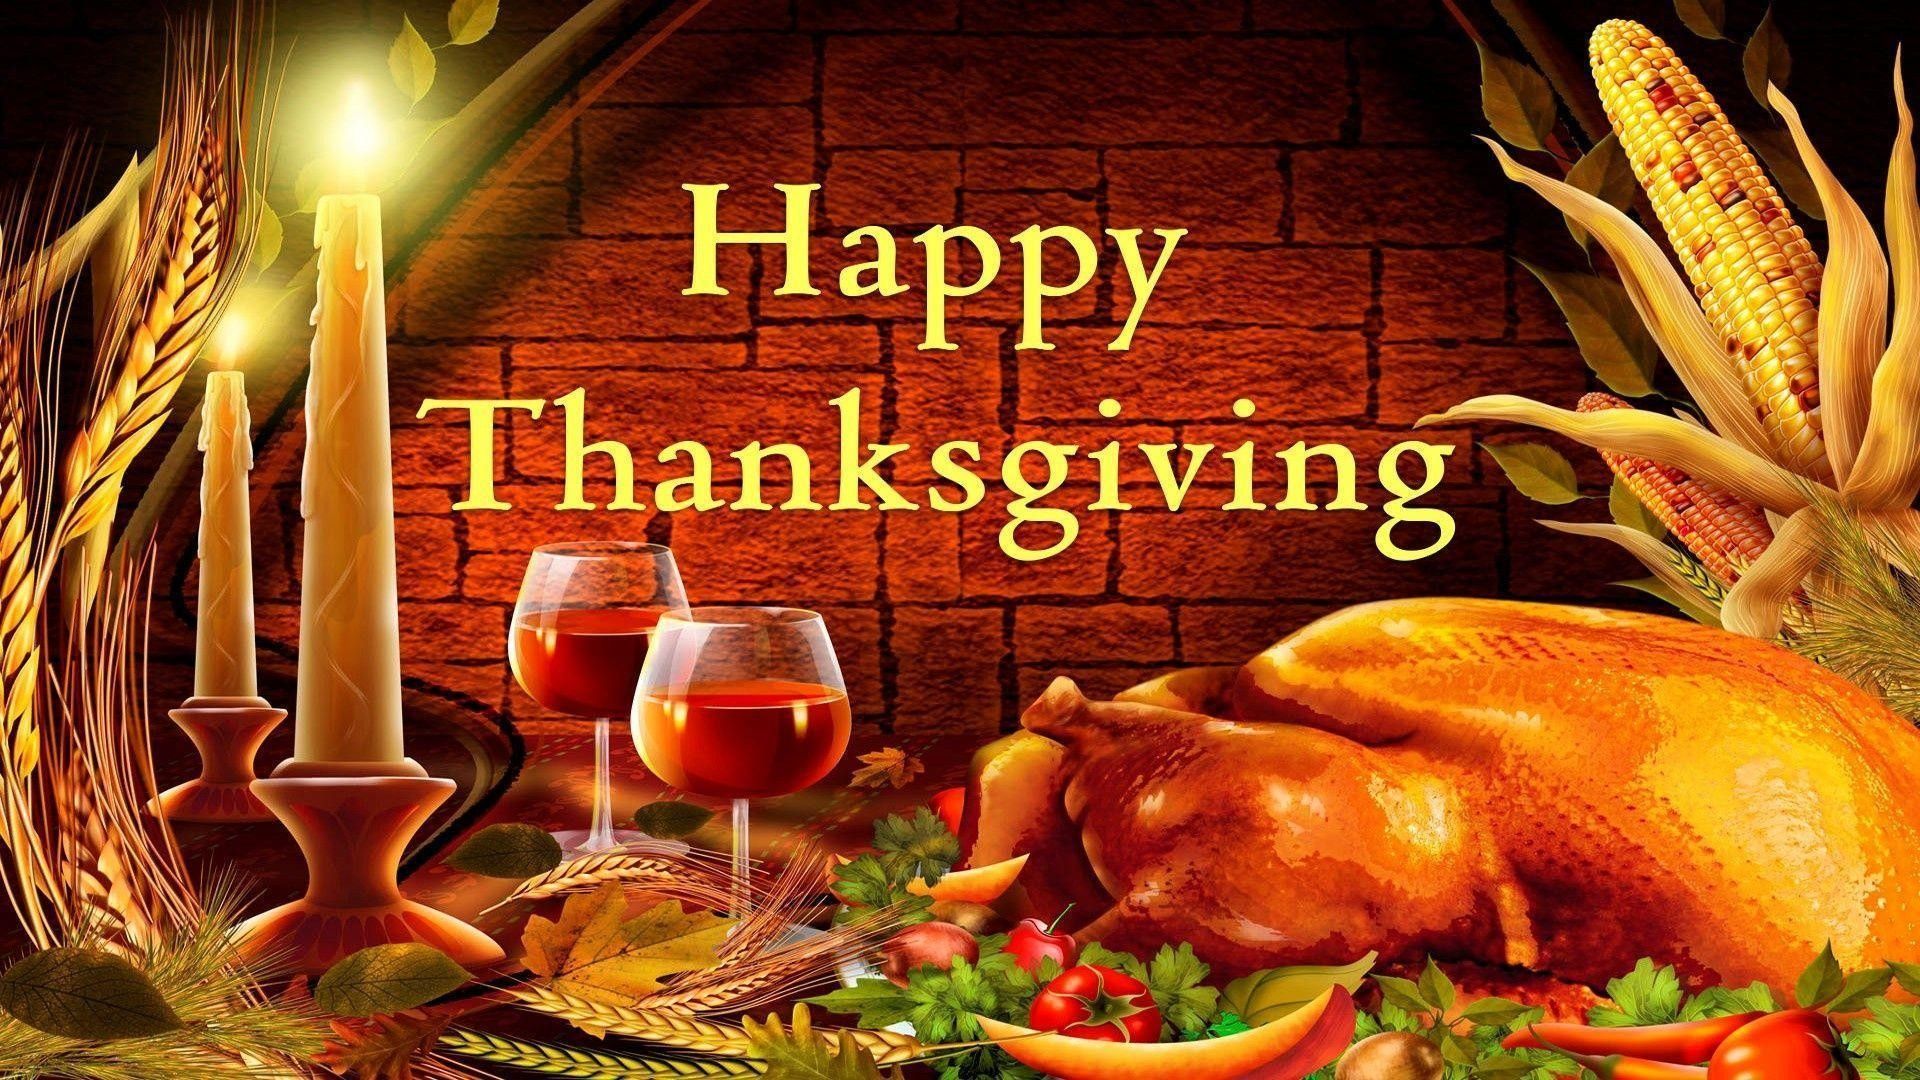 Happy Thanksgiving Wallpaper FREE Picture